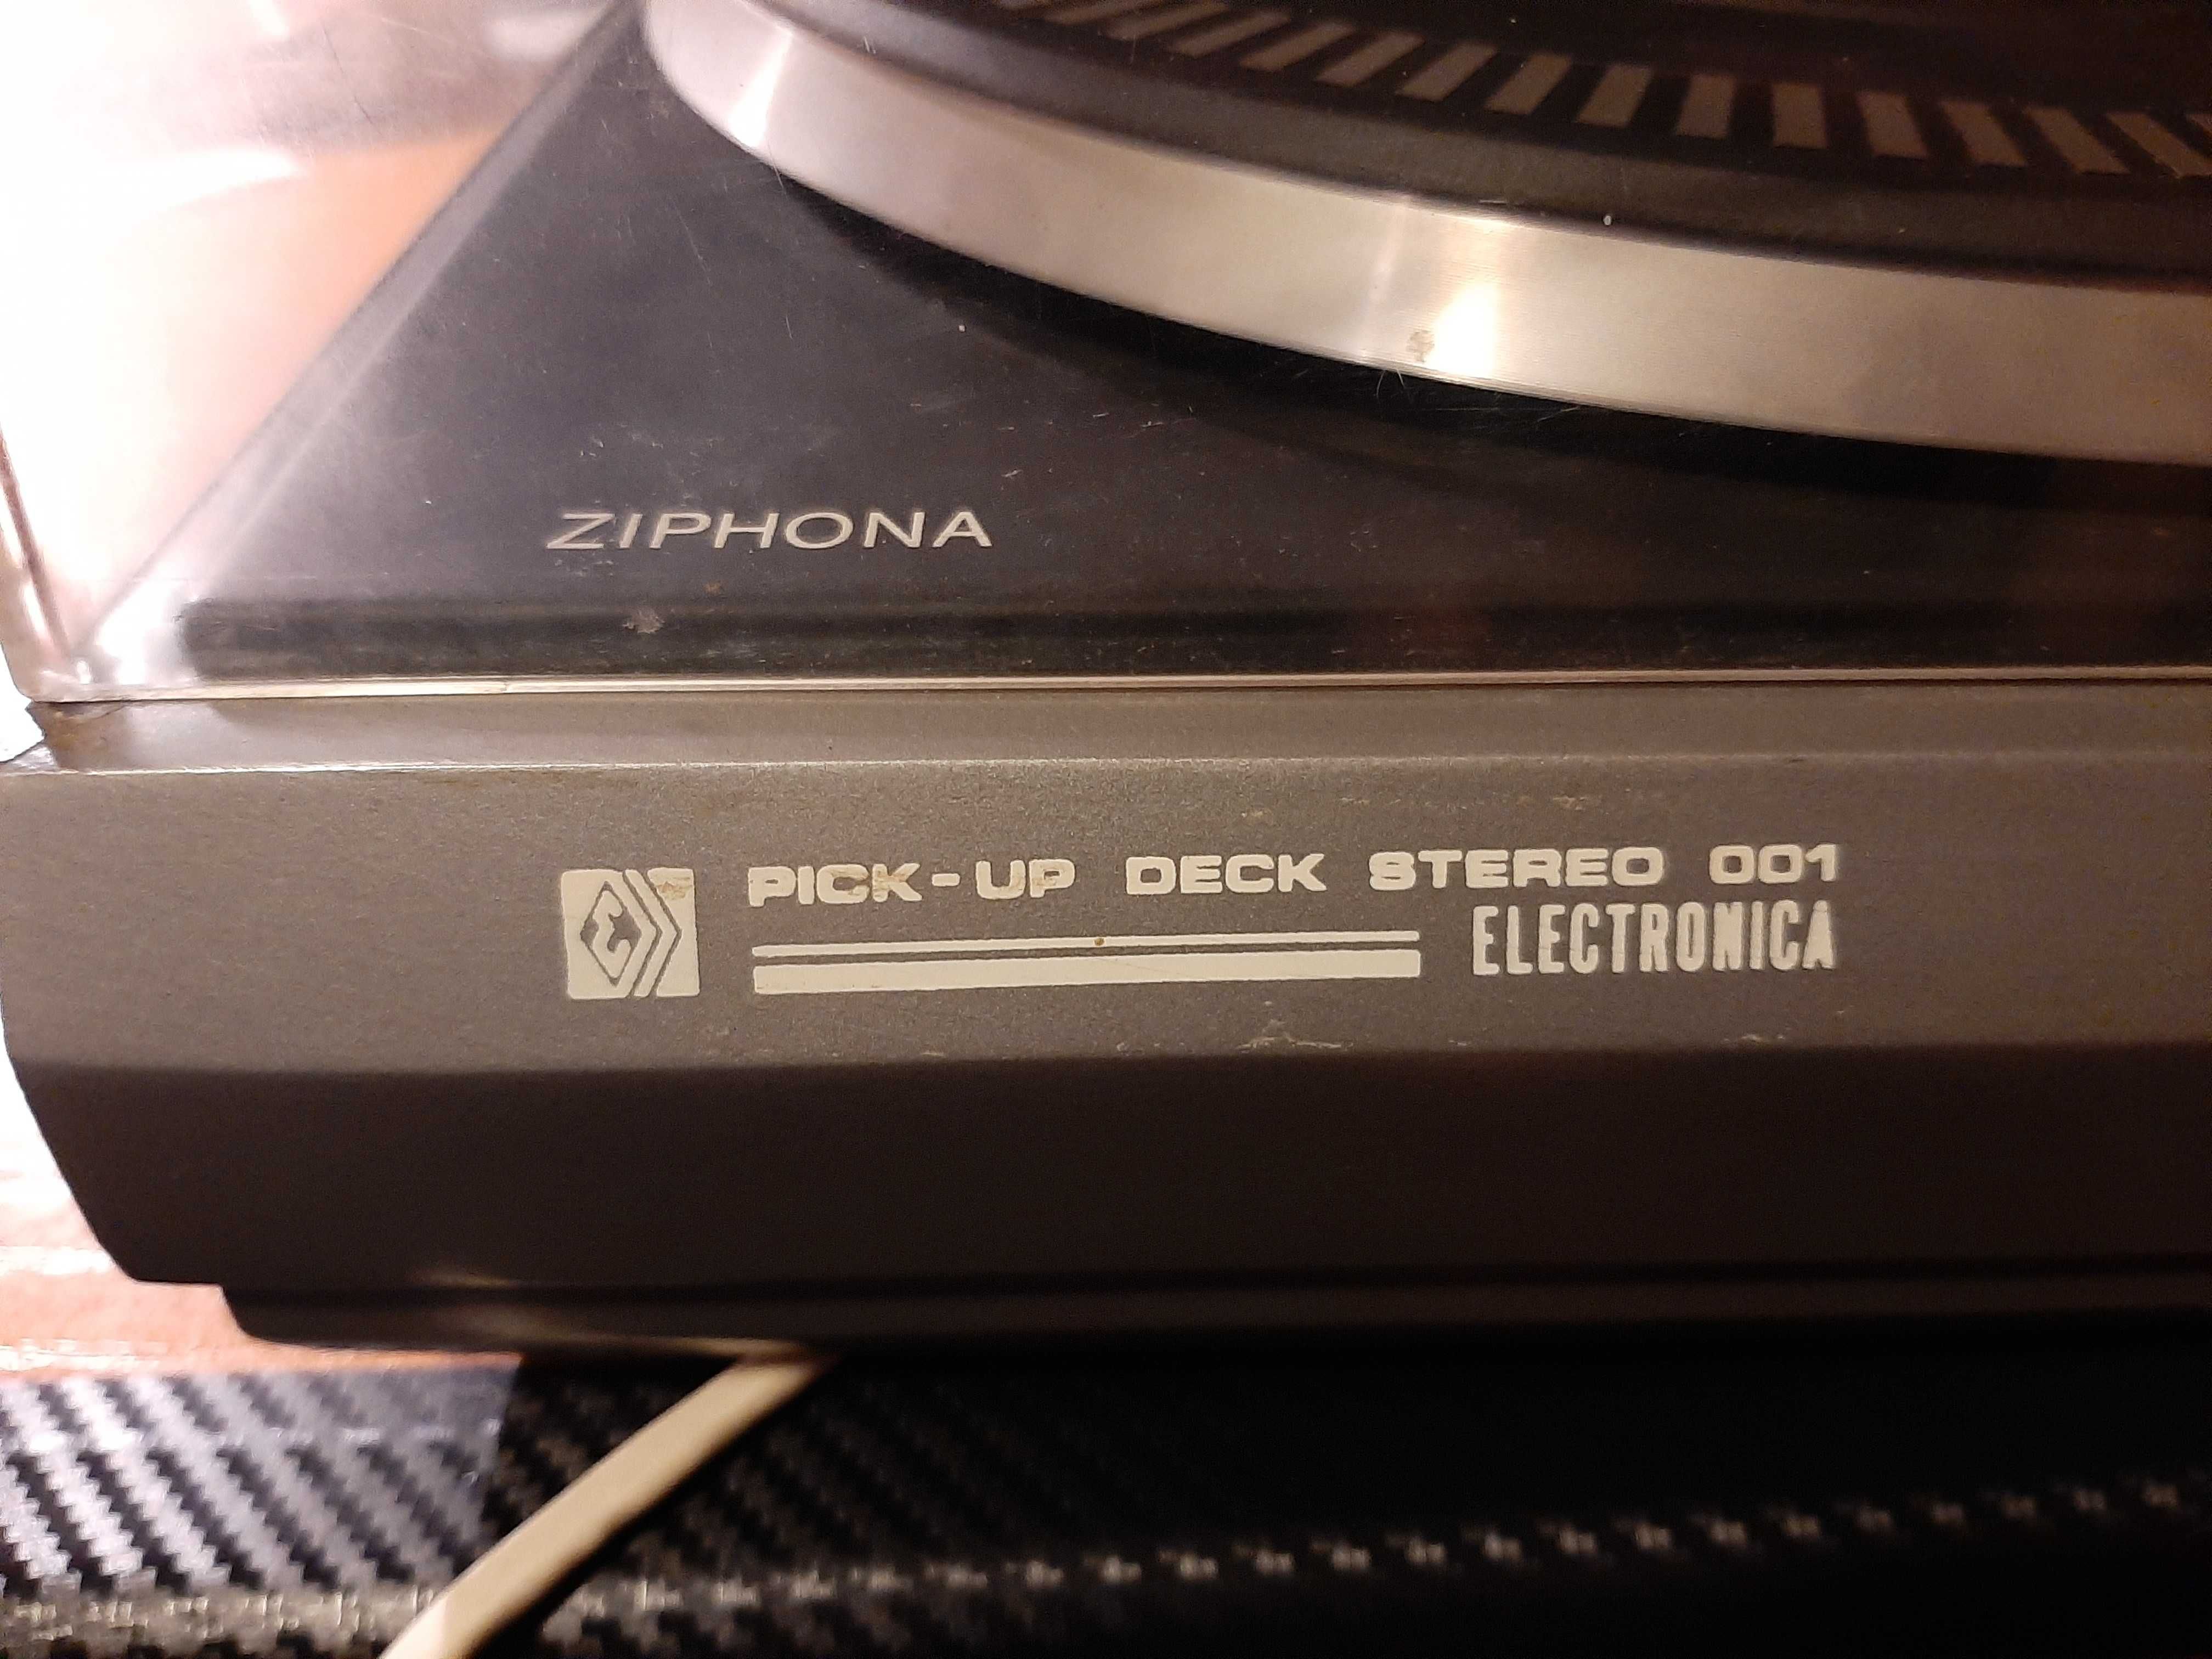 Pick up Ziphona  deck stereo 001 Electronica